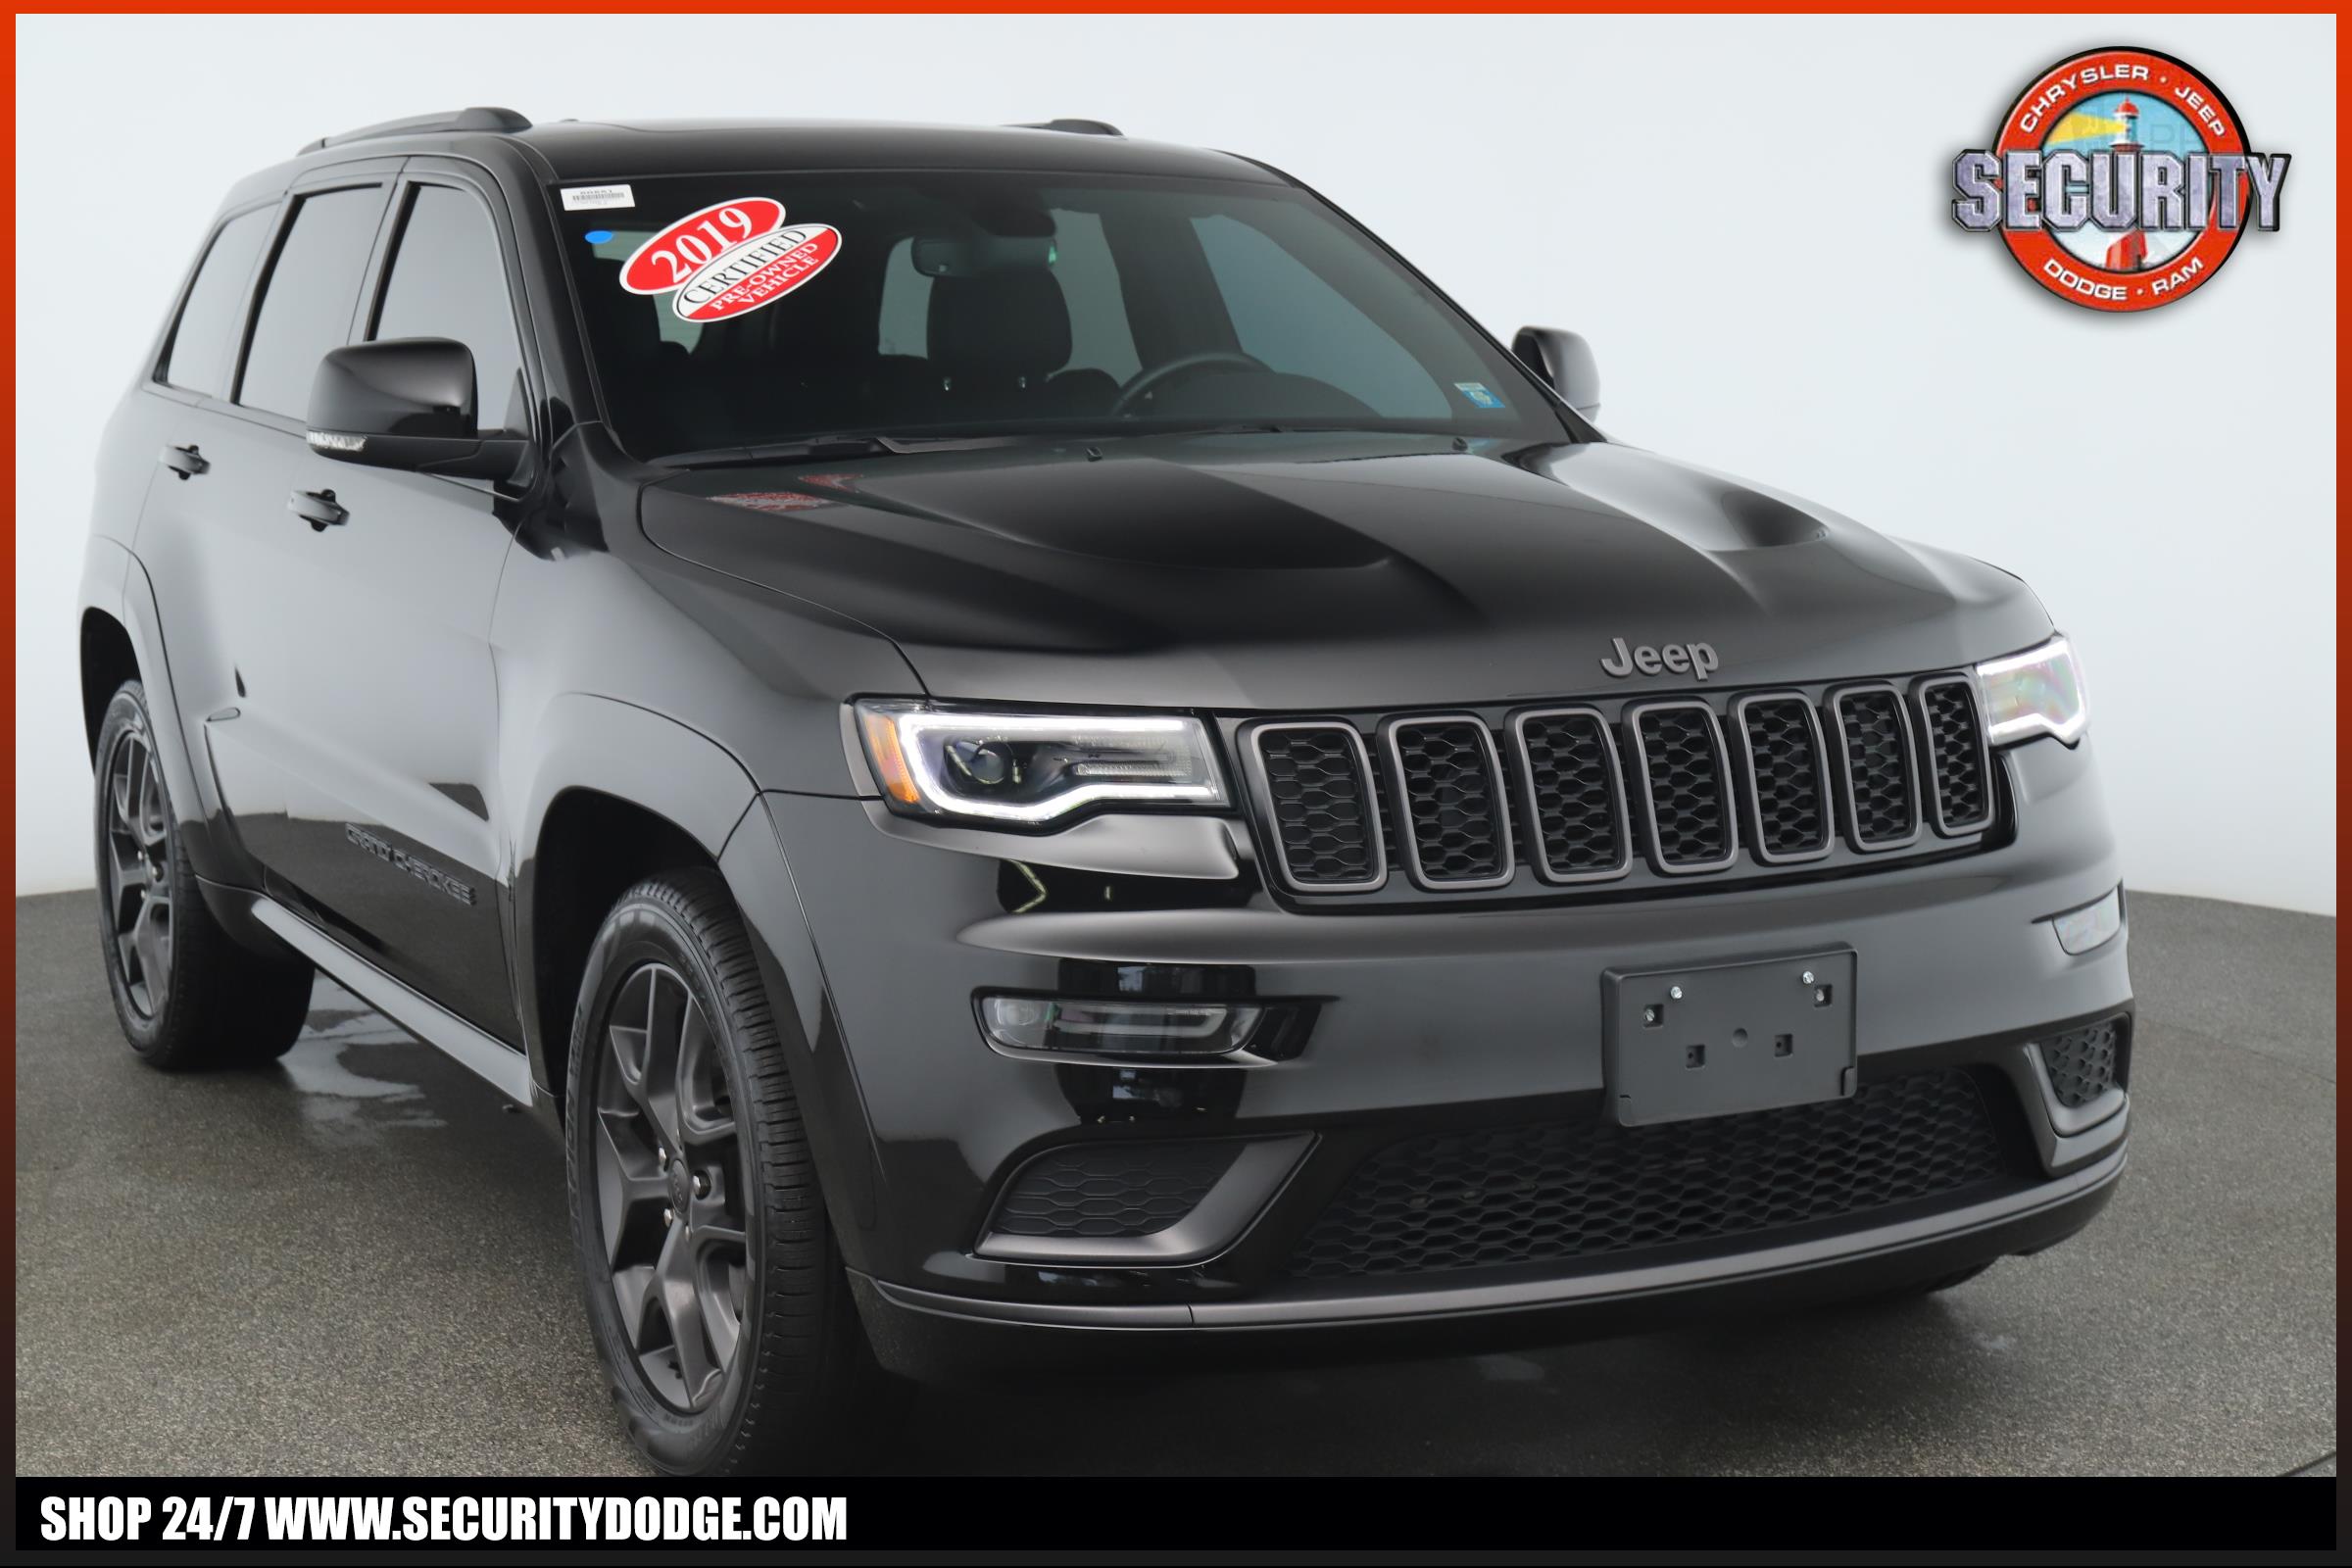 Certified Pre Owned 19 Jeep Grand Cherokee In Amityville Long Island Ny L Security Dodge Chrysler Jeep Ram